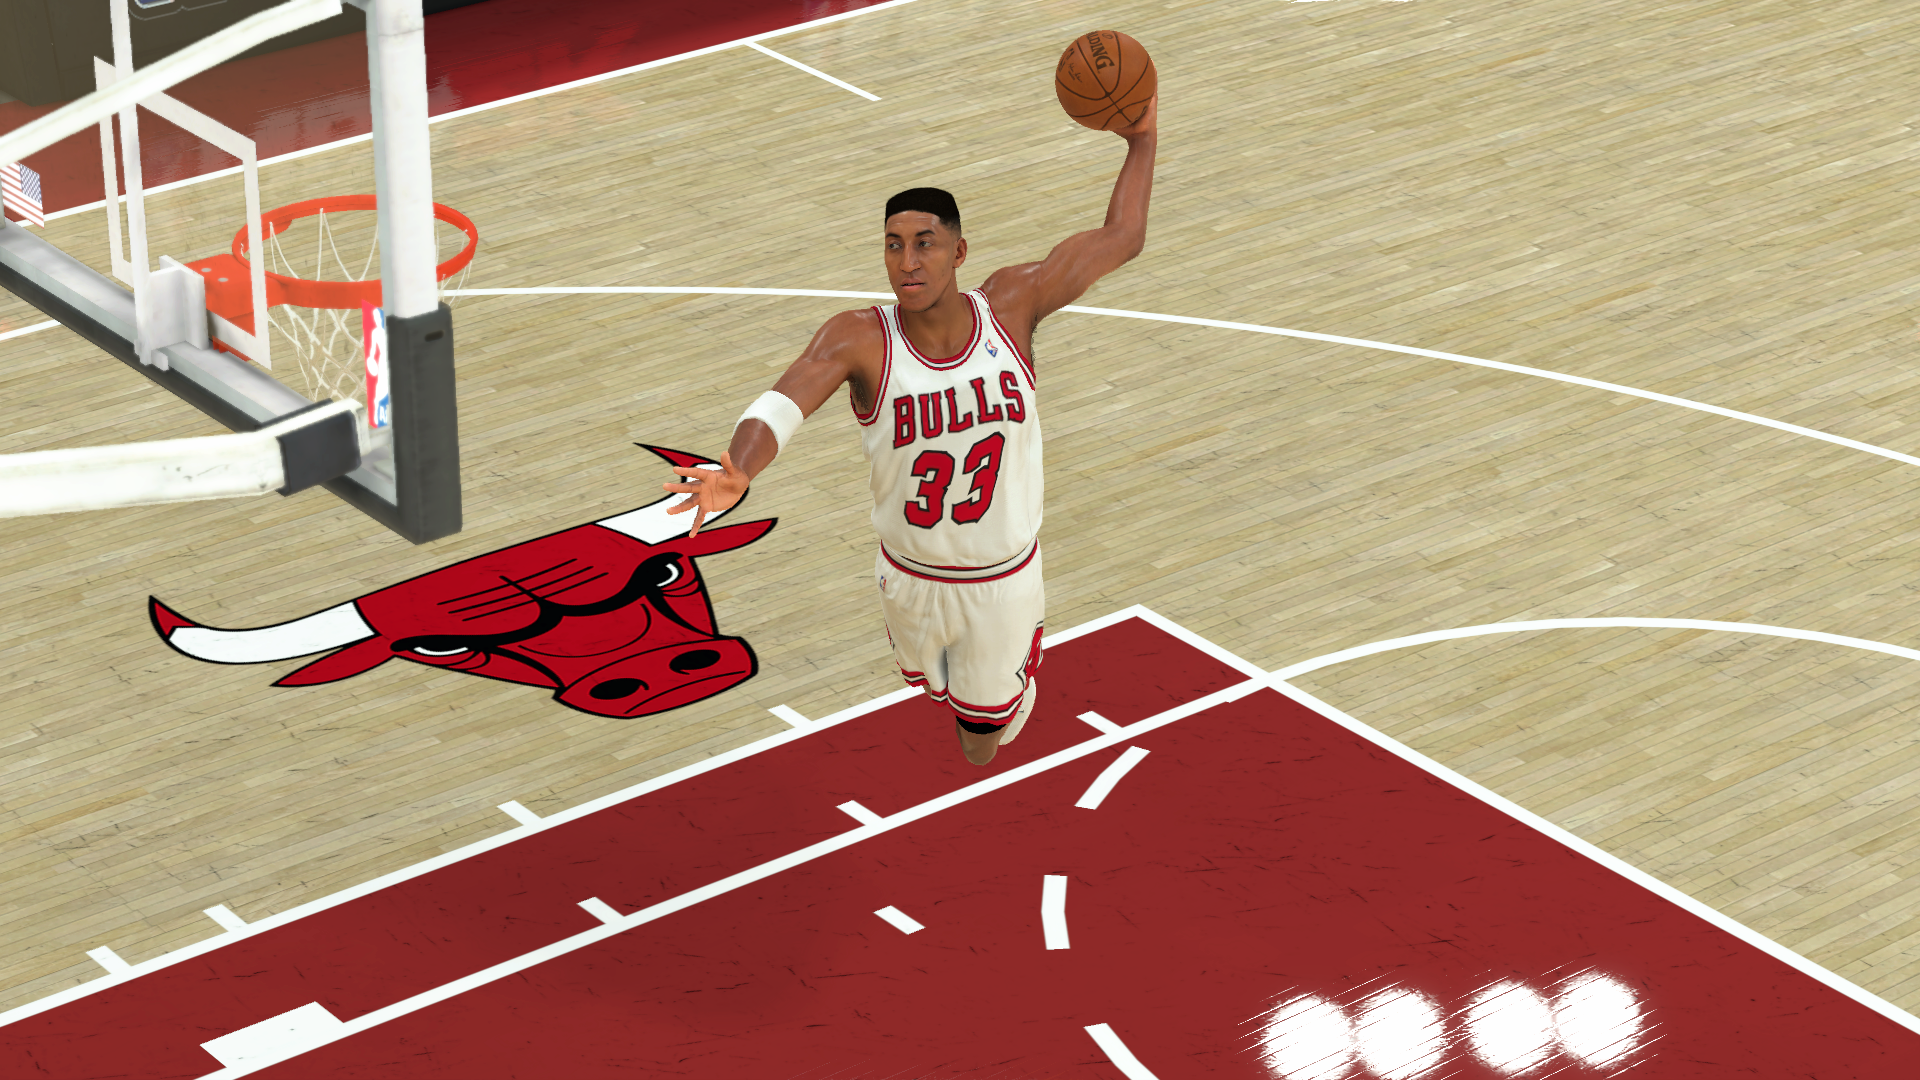 Monday Tip-Off: A PSA About NBA 2K Custom Images - NLSC